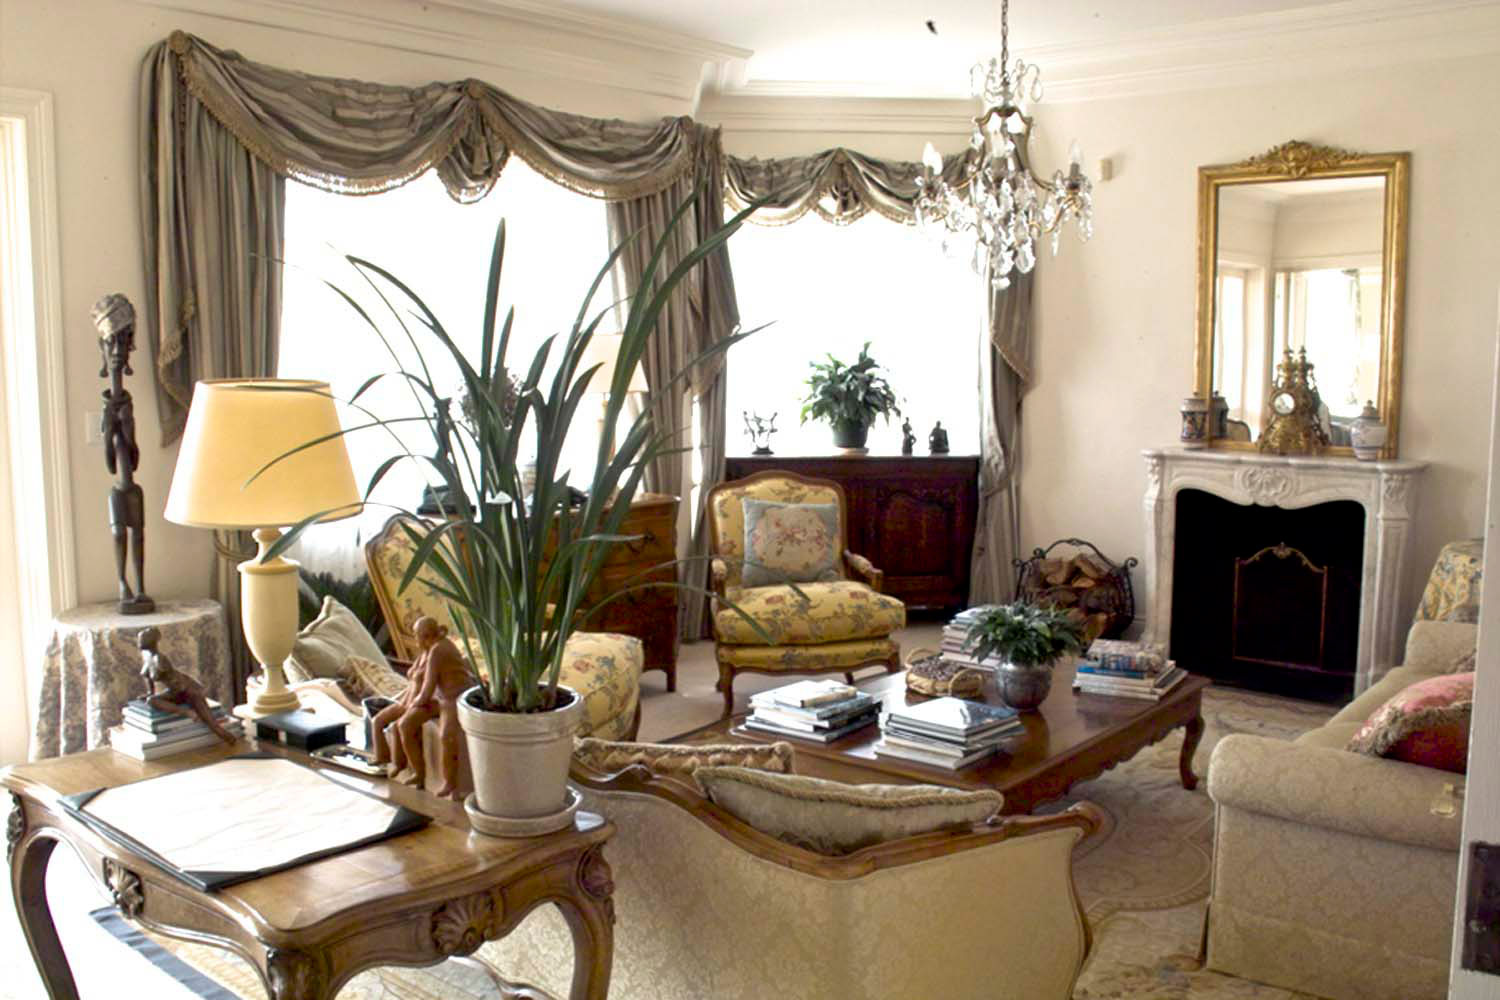 3 French Lounge Louis XV funiture and mirror with gilding finishes and classical chandelier